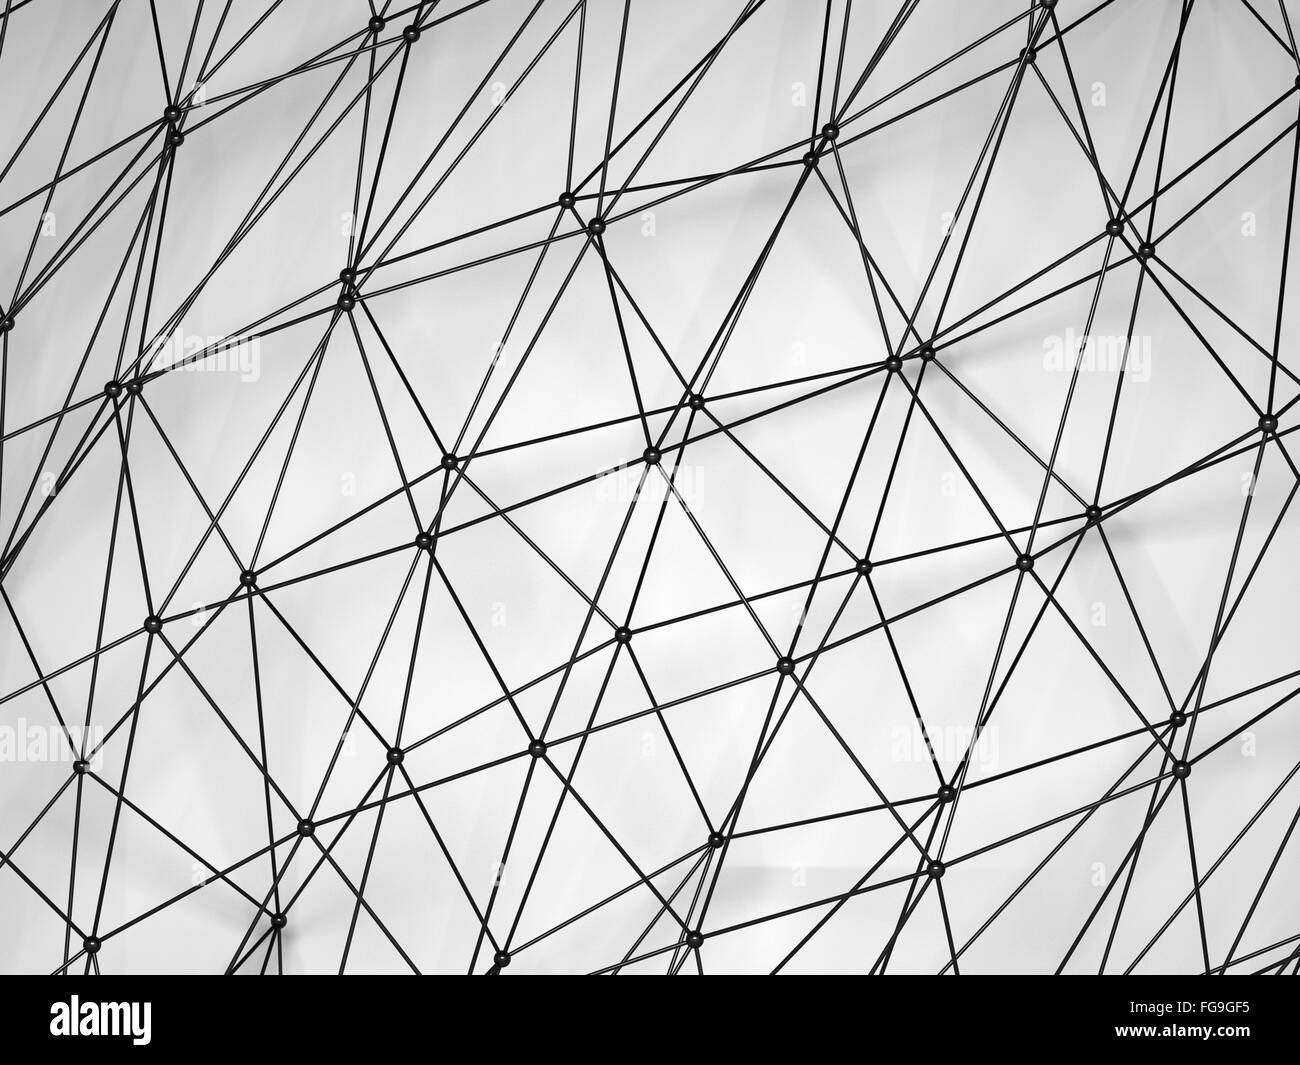 Abstract black shining 3d digital molecular mesh structure over white background with soft shadow Stock Photo